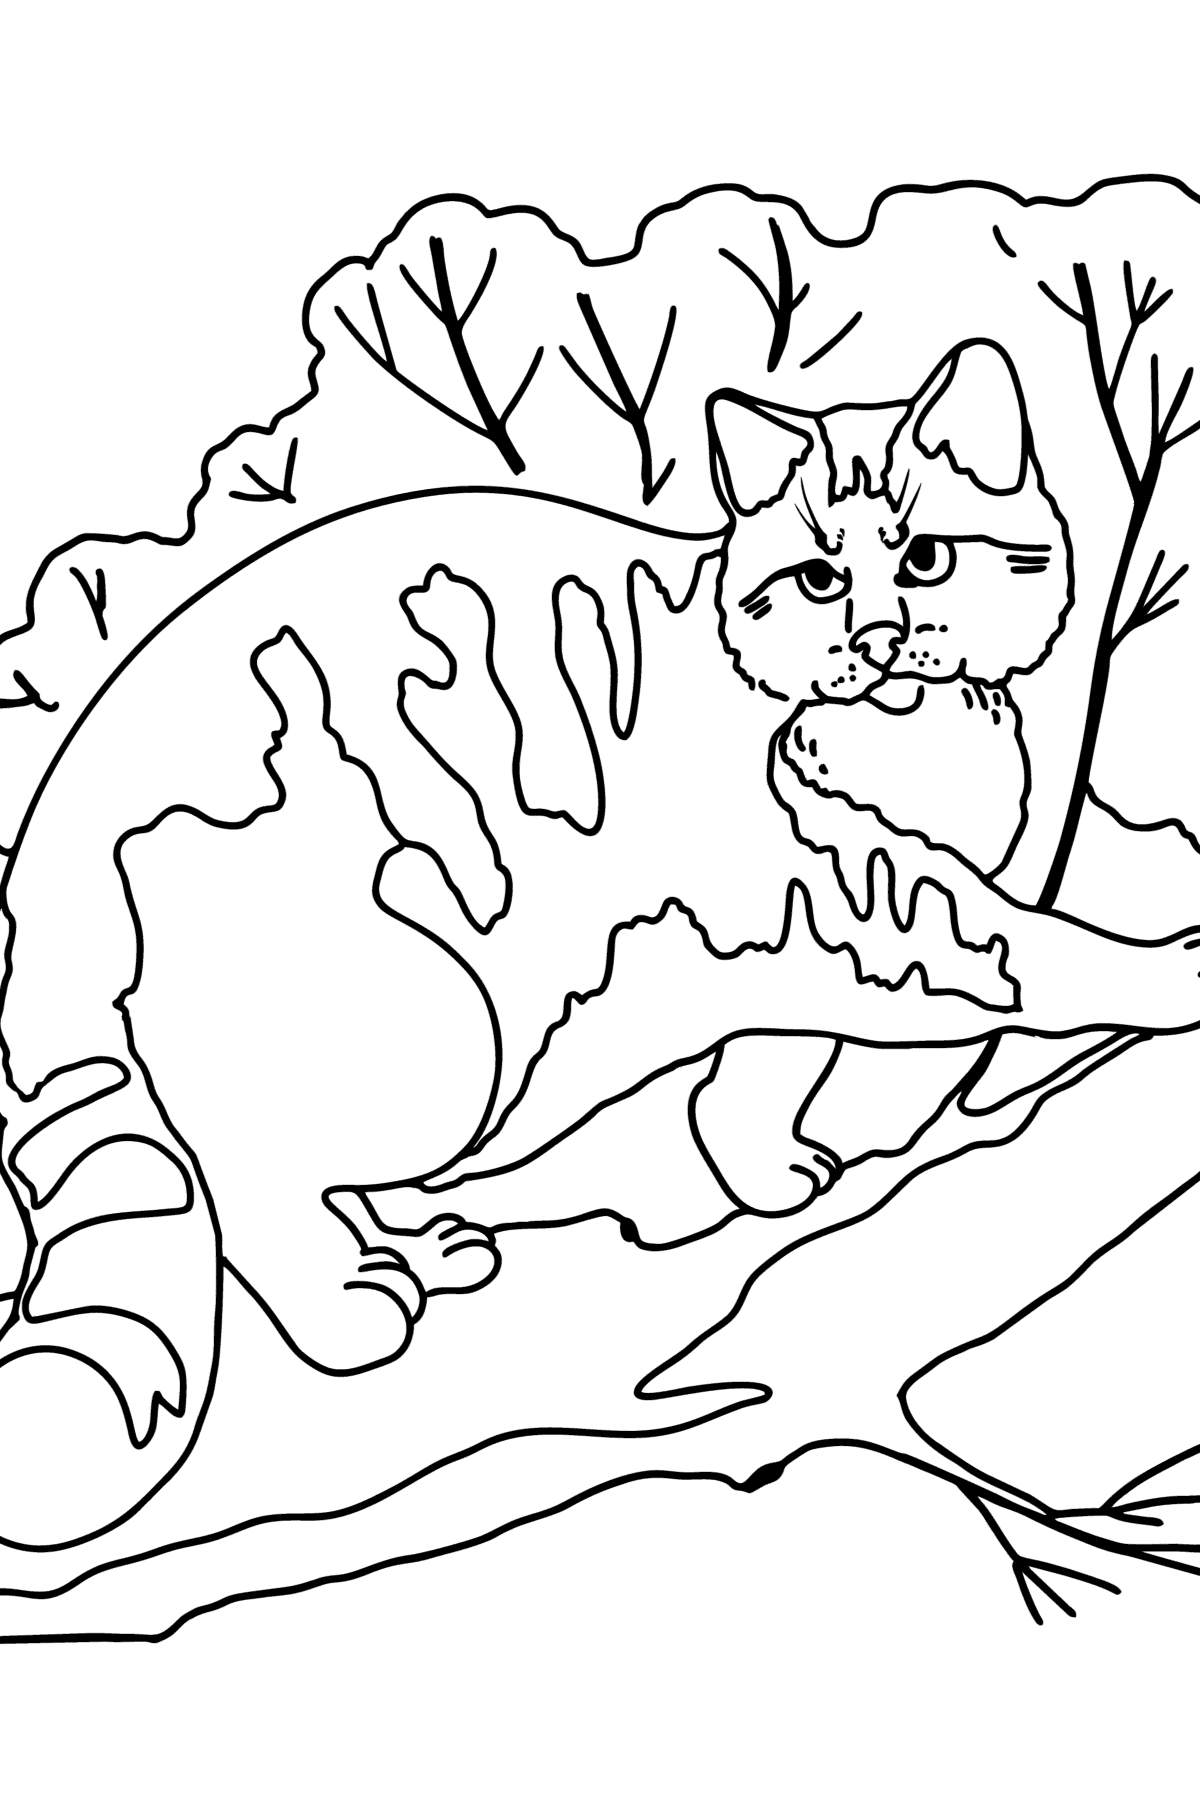 Coloring Pages Of Wild Cats